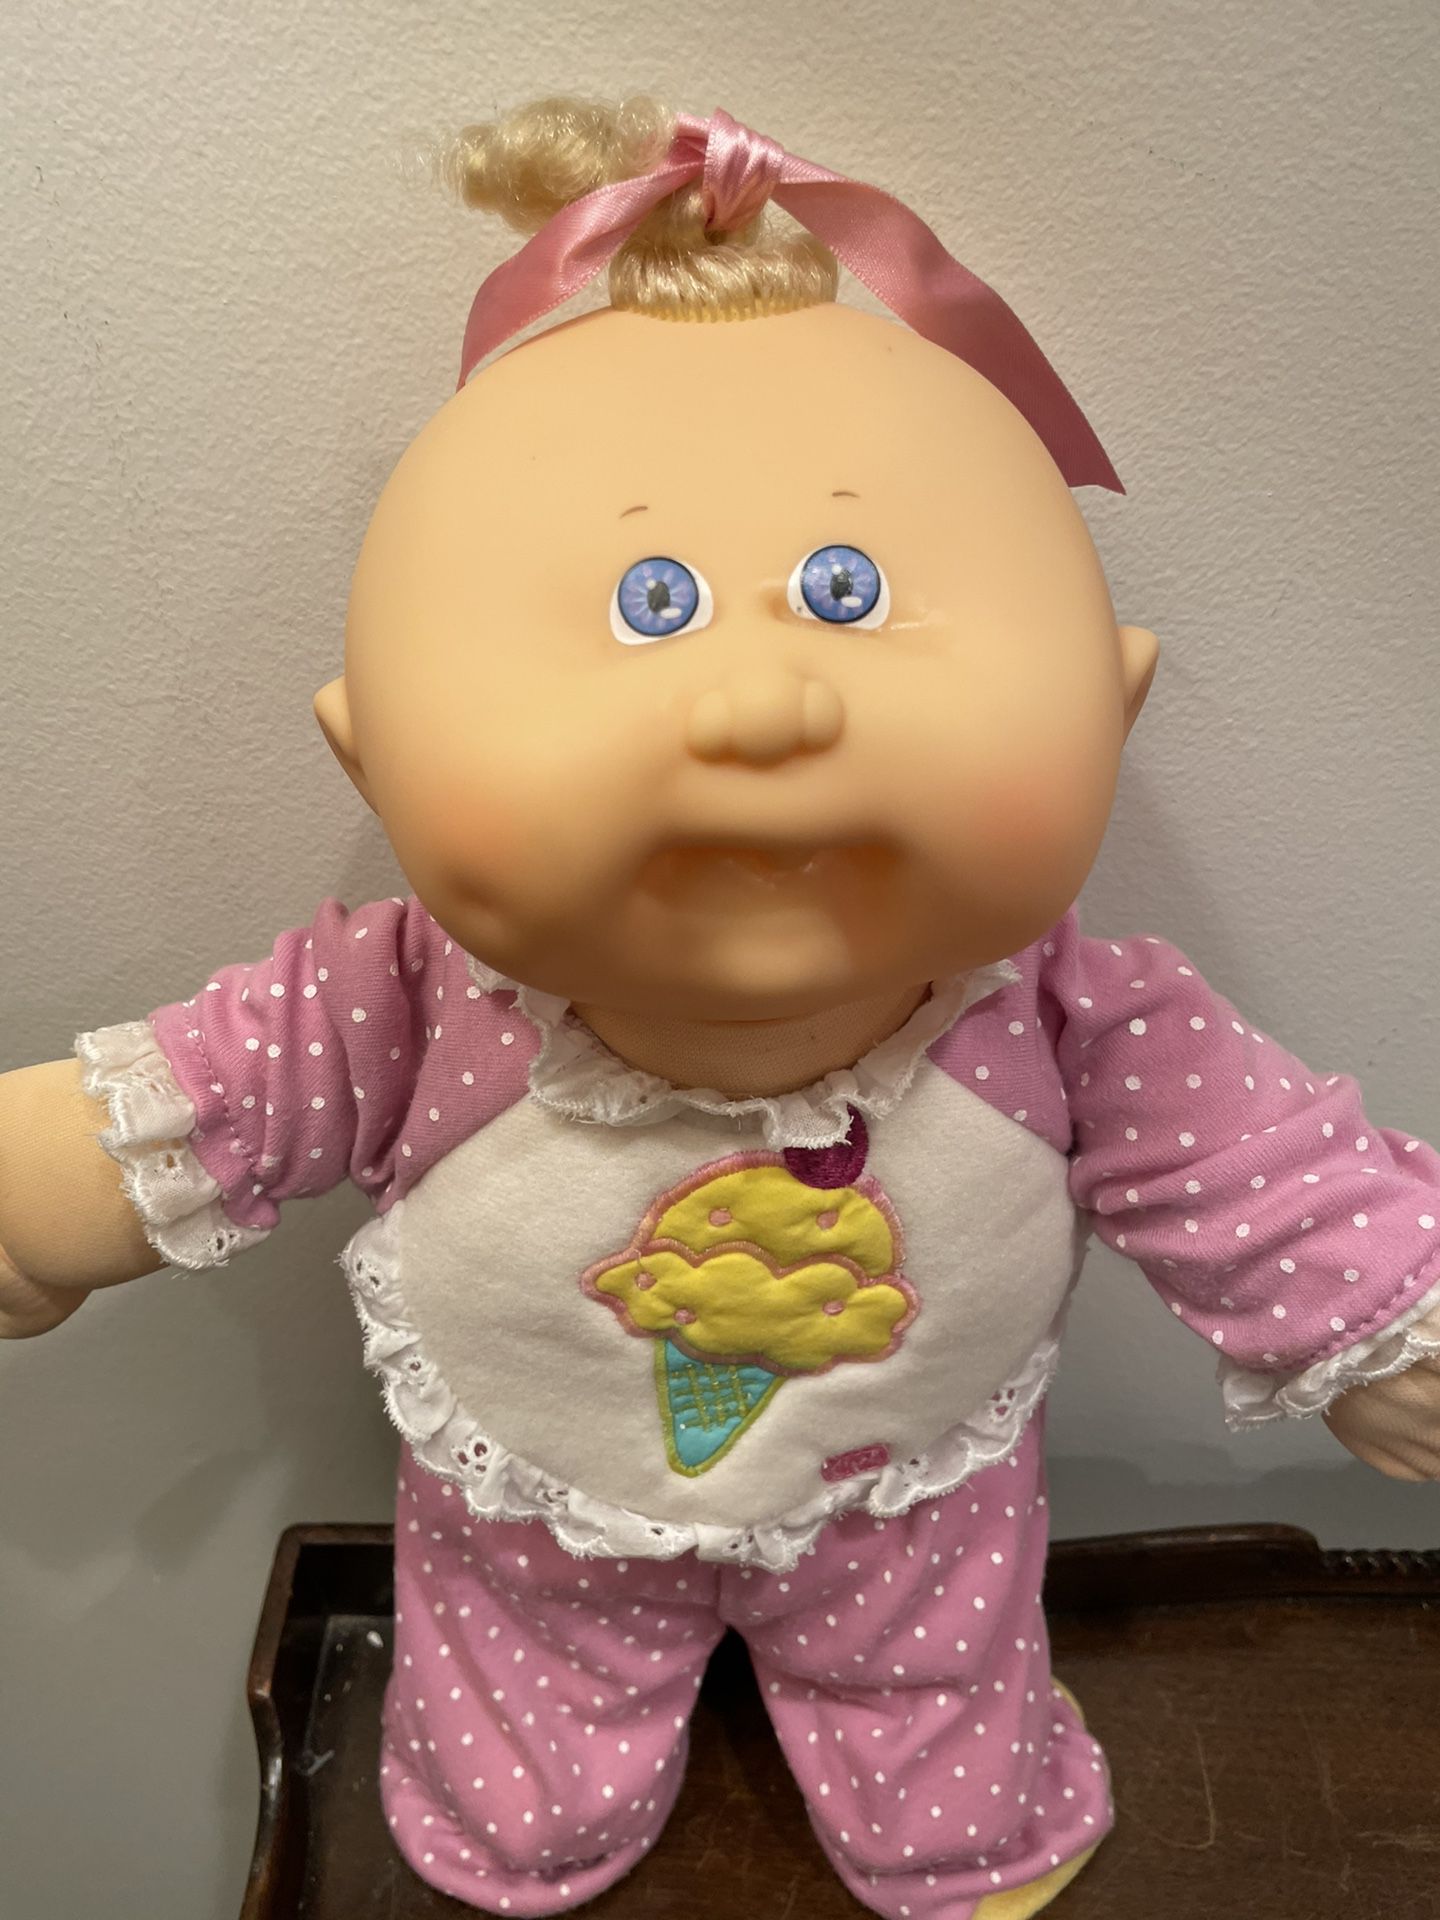 1989 Cabbage Patch Kids OAA 16” Doll Blonde Pig Tail- CPK- #2318 Pajamas-RARE! Condition is pre owned and shows some light signs of wear from age and 